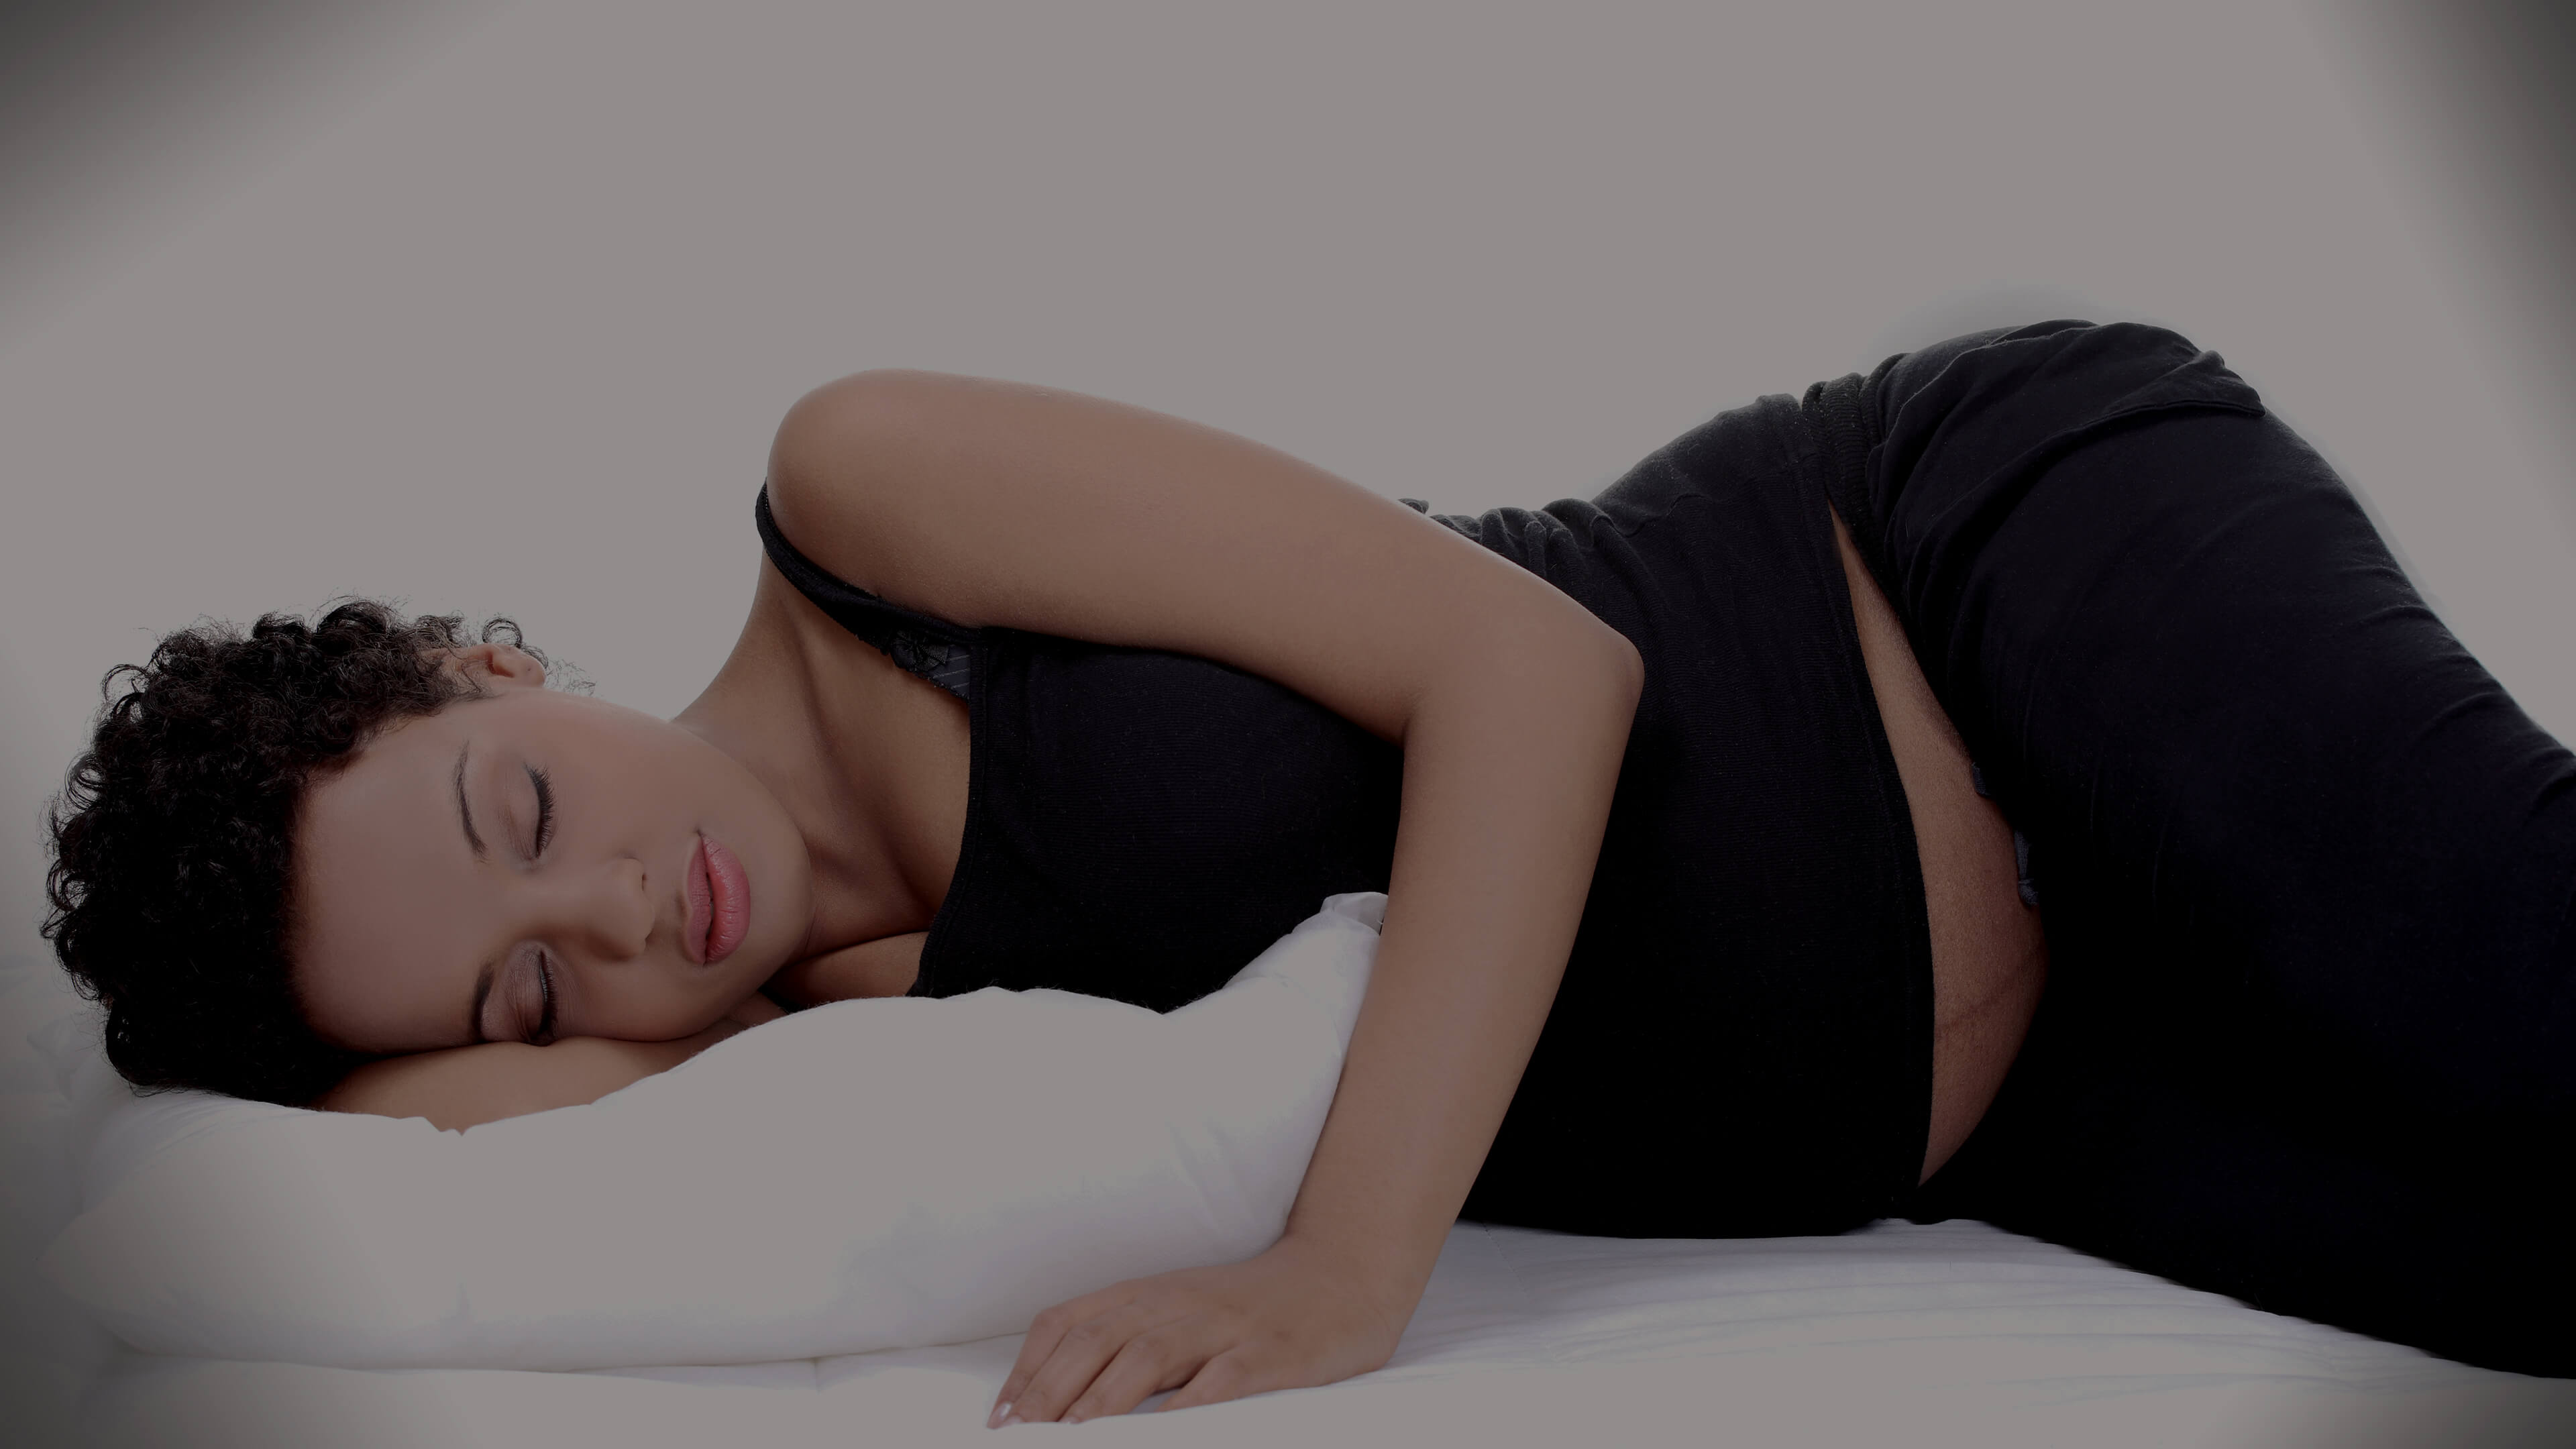 pillows to help you sleep upright